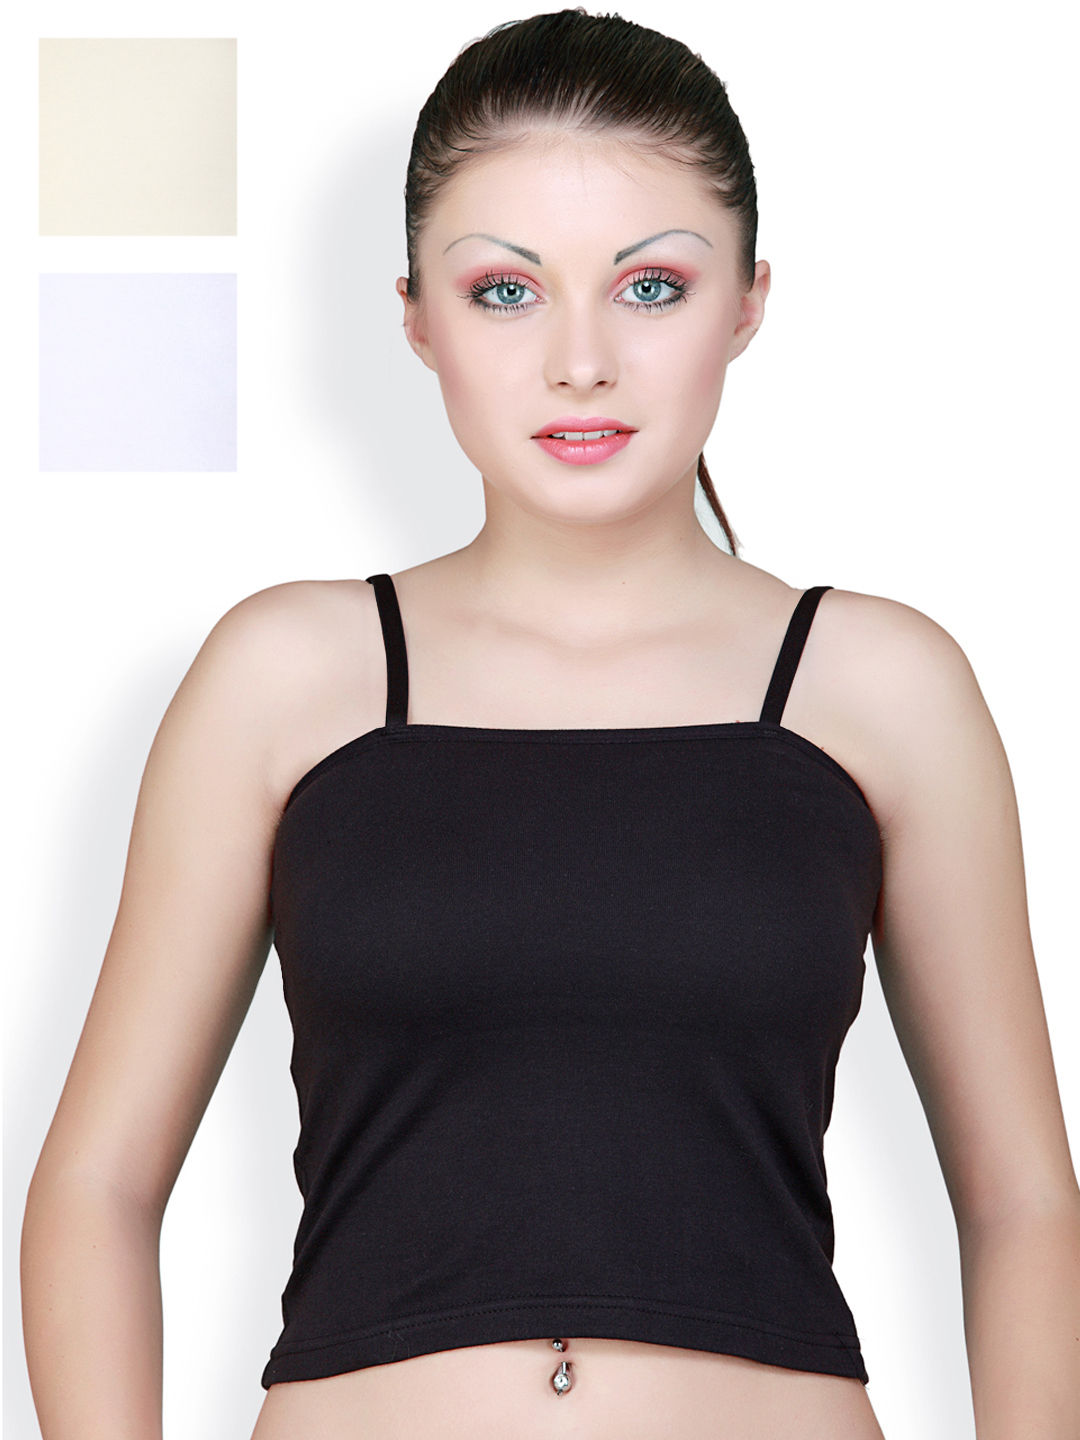 Nykd by Nykaa Cotton Camisole slip with in-built Bra - NYC003 White